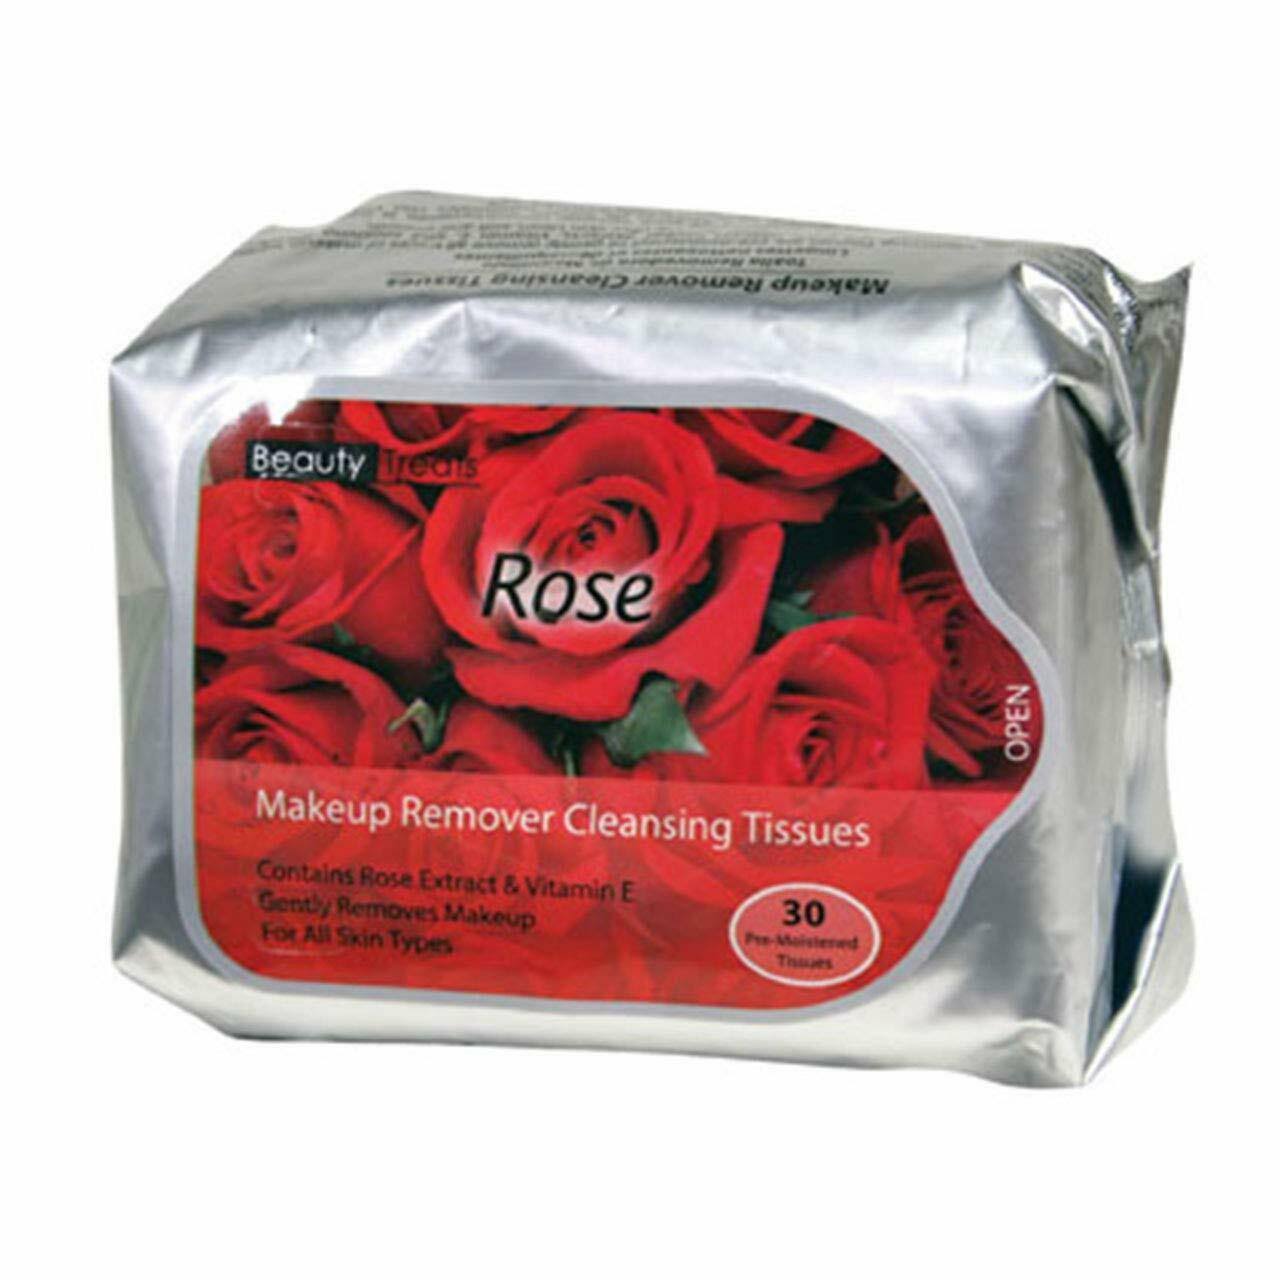 Beauty Treats Makeup Remover Cleansing Tissues Rose